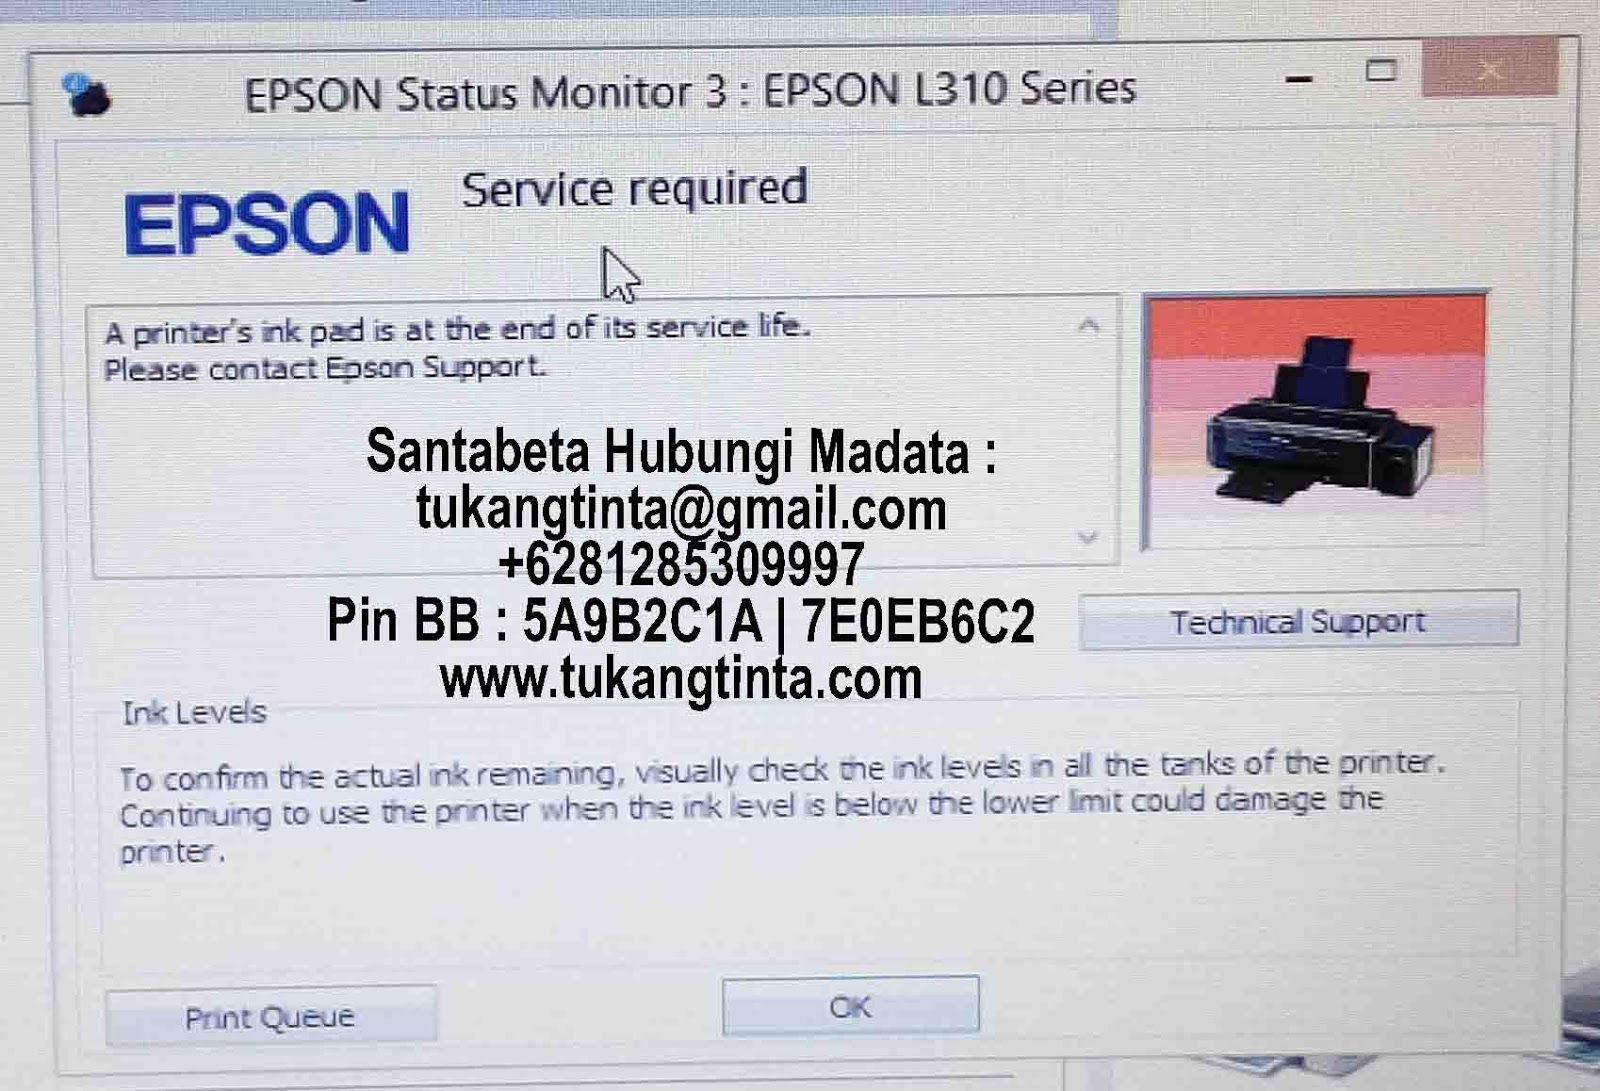 Canon mp280 ошибка p08. The Printer's Ink Pads are at the end of their service Life. Please contact Epson support. Что делать. Canon g2415 ошибка p07